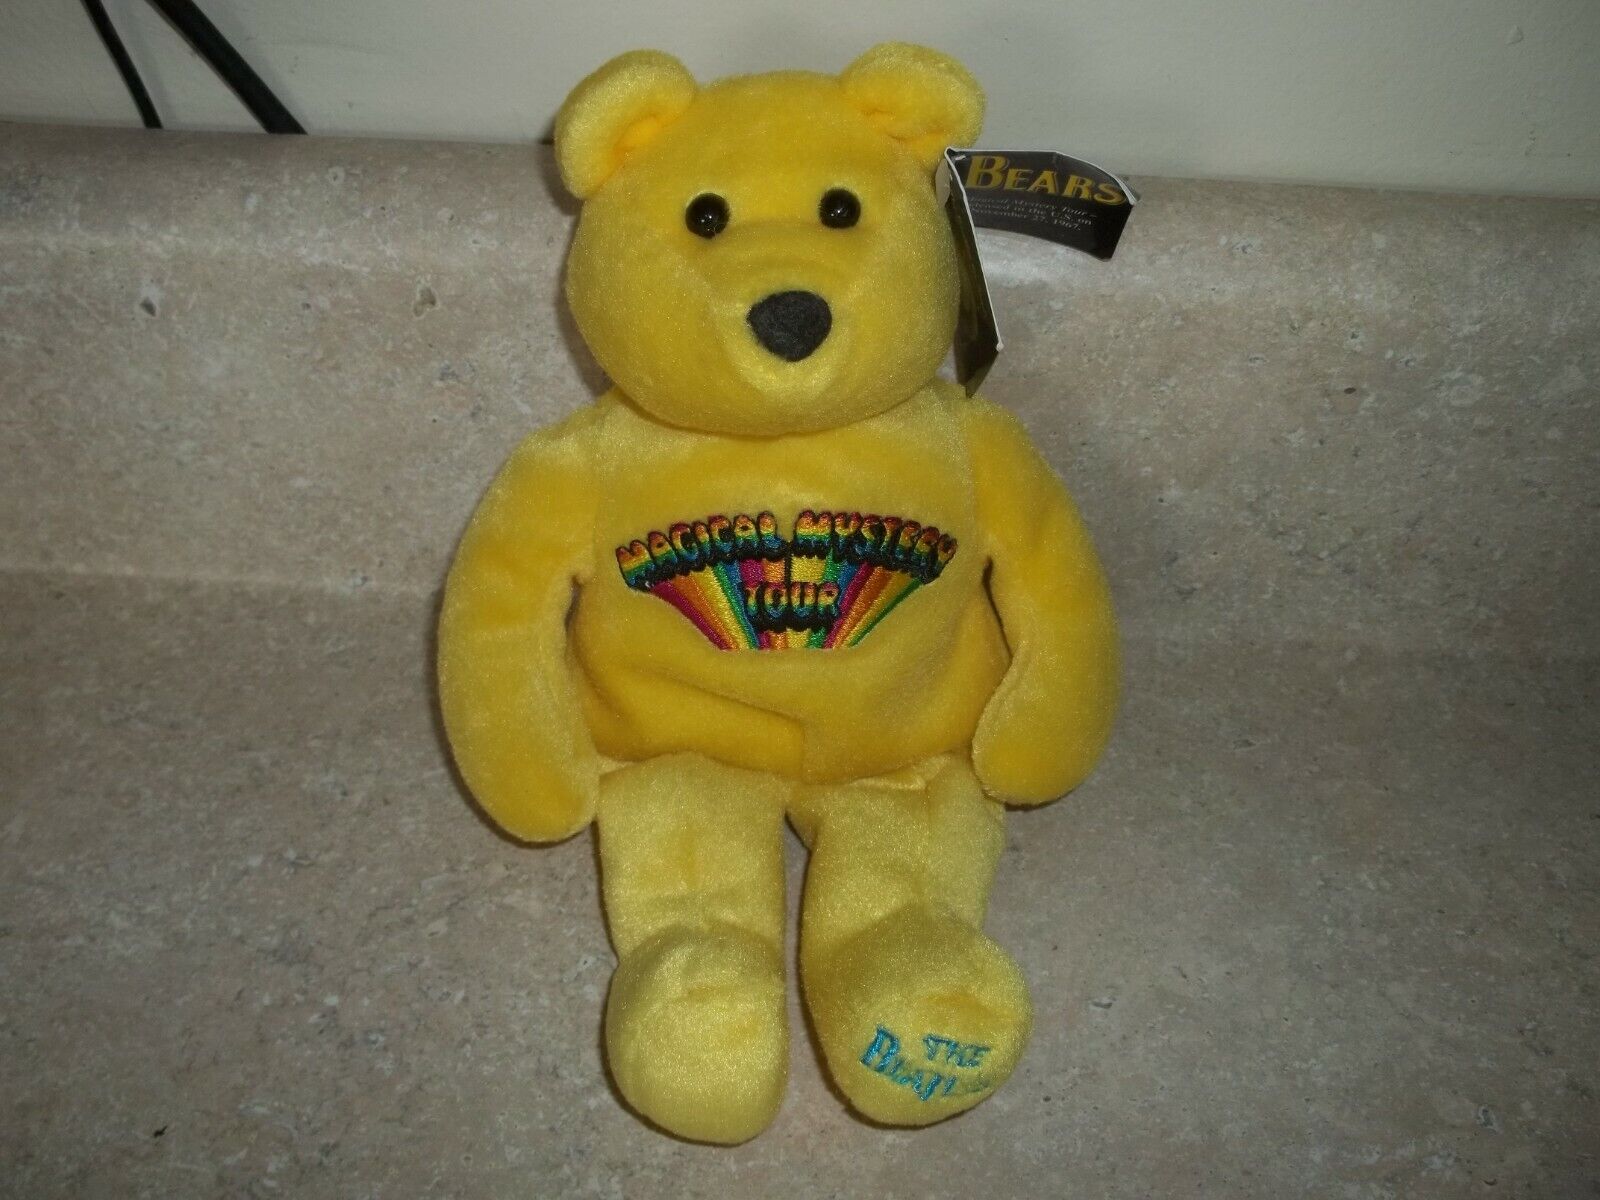 1999 The Beatles Bear Magical Mystery Tour By Apple Corps Stuffe